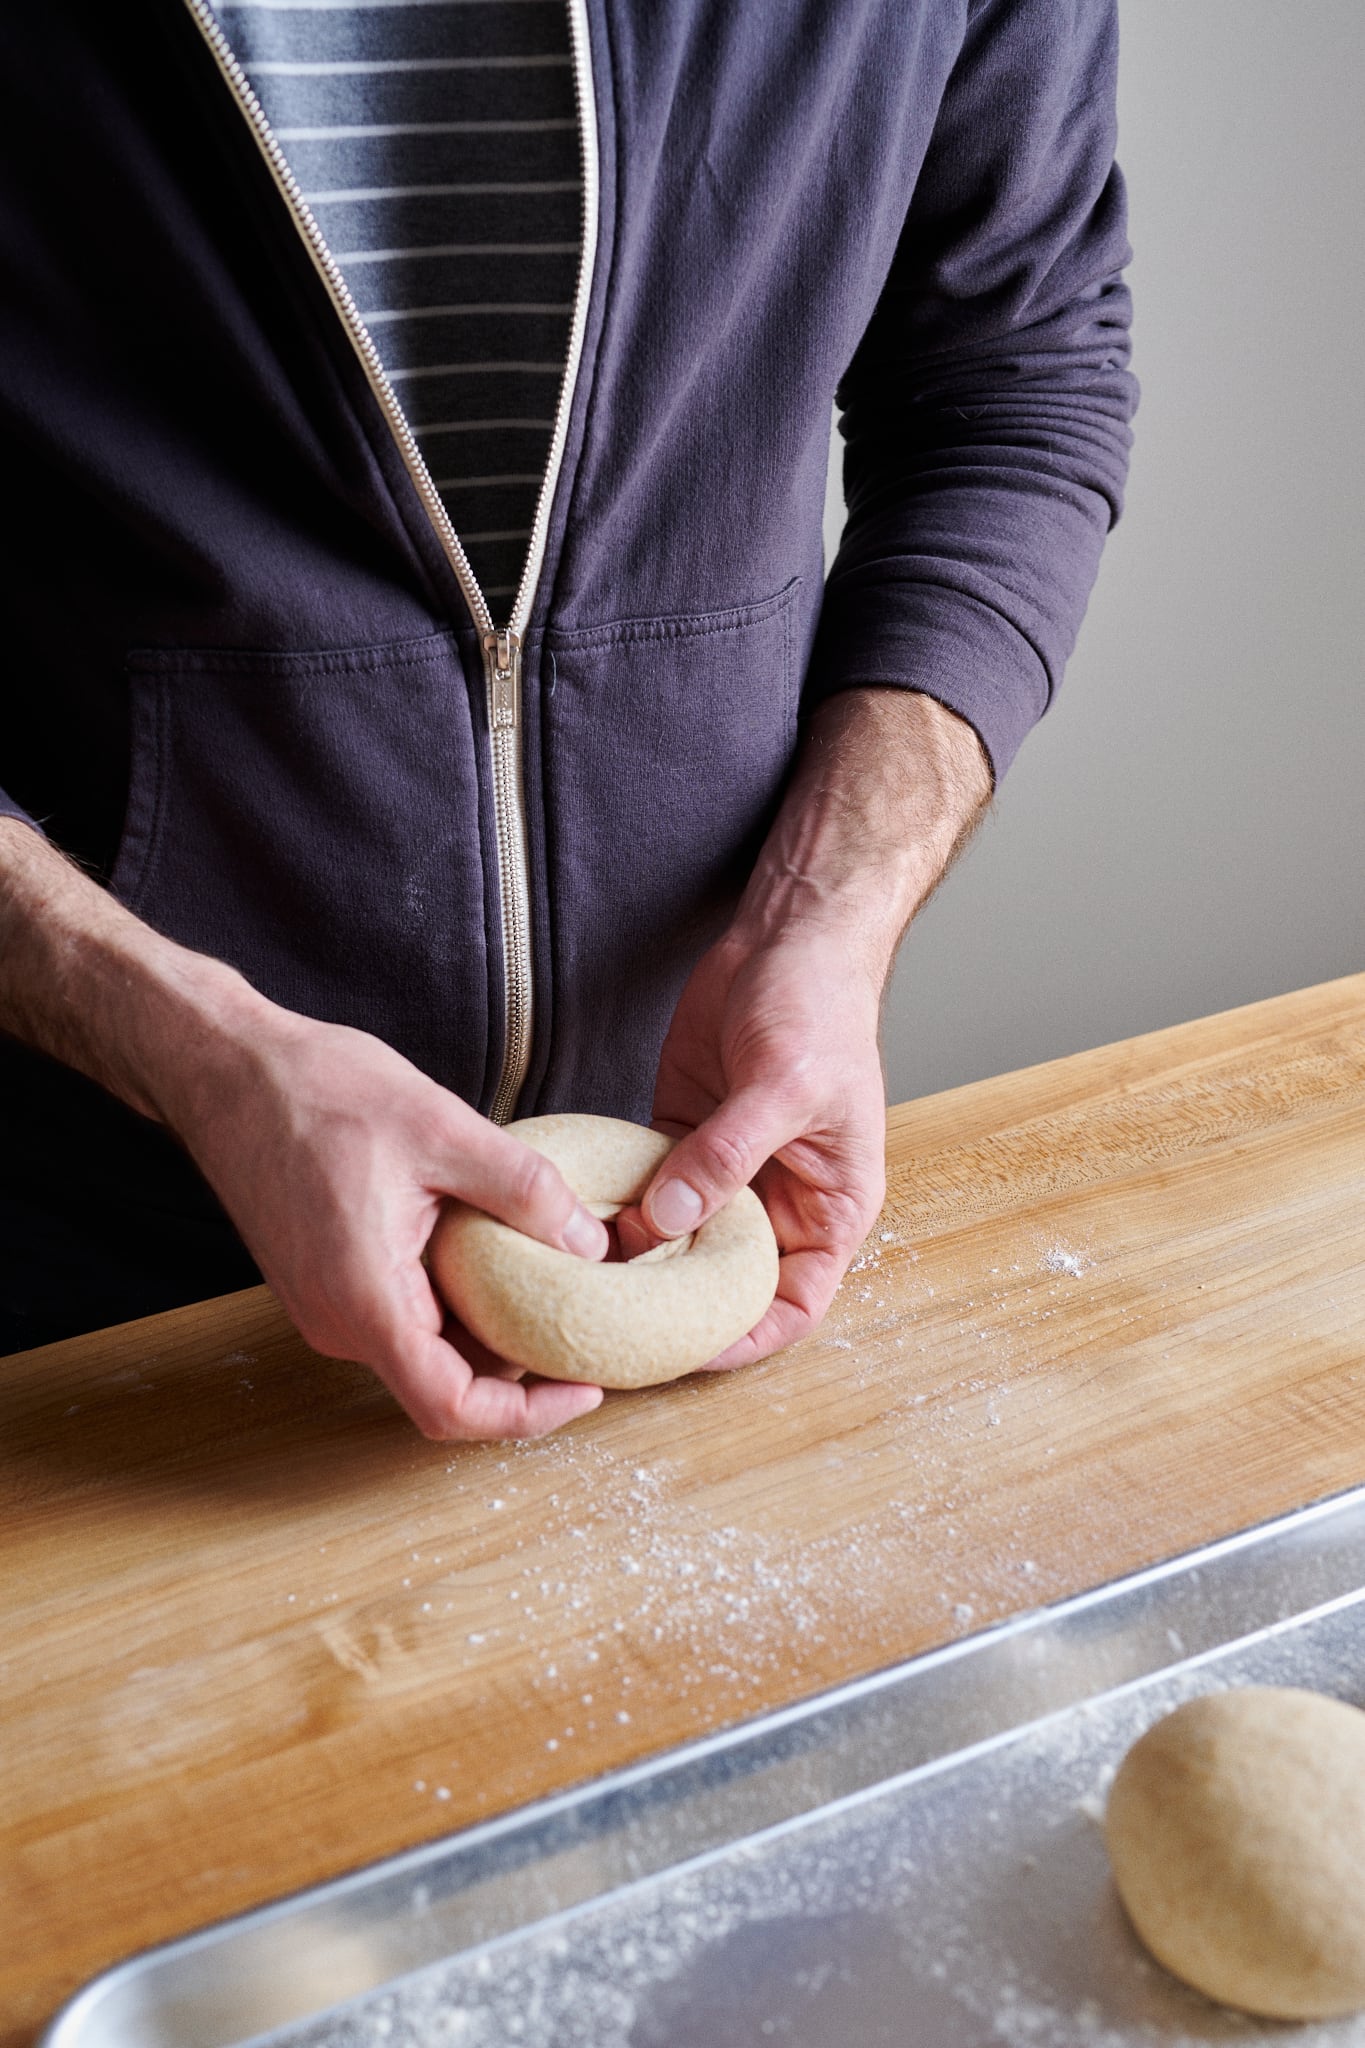 Creating a larger hole in the sourdough friselle dough.